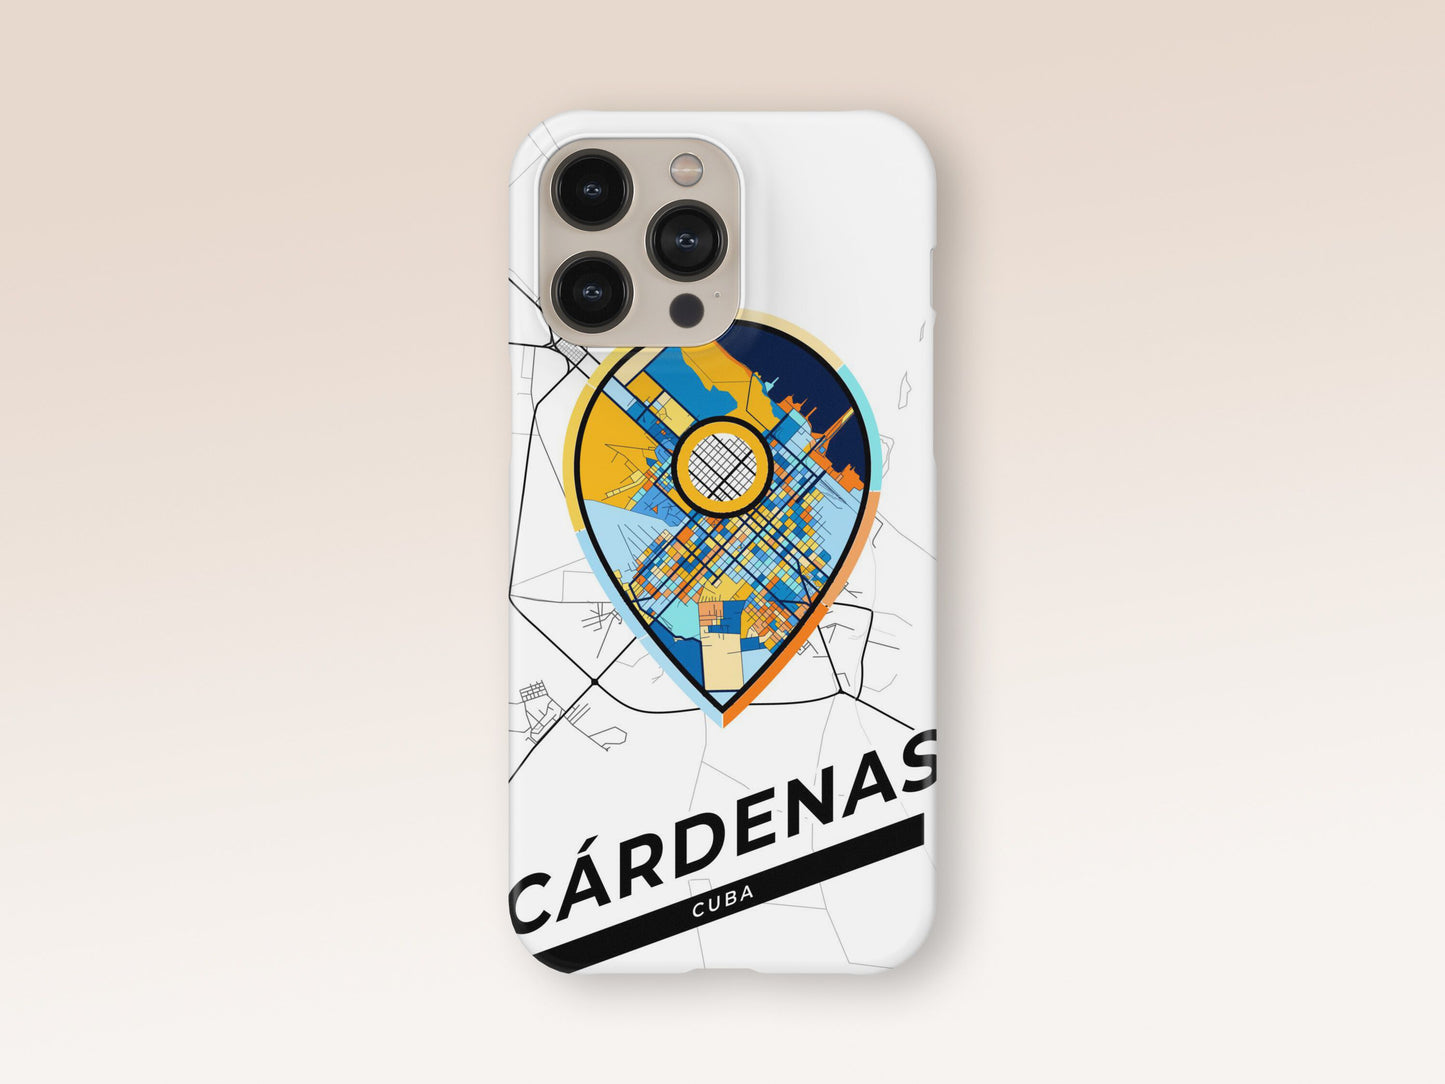 Cárdenas Cuba slim phone case with colorful icon. Birthday, wedding or housewarming gift. Couple match cases. 1